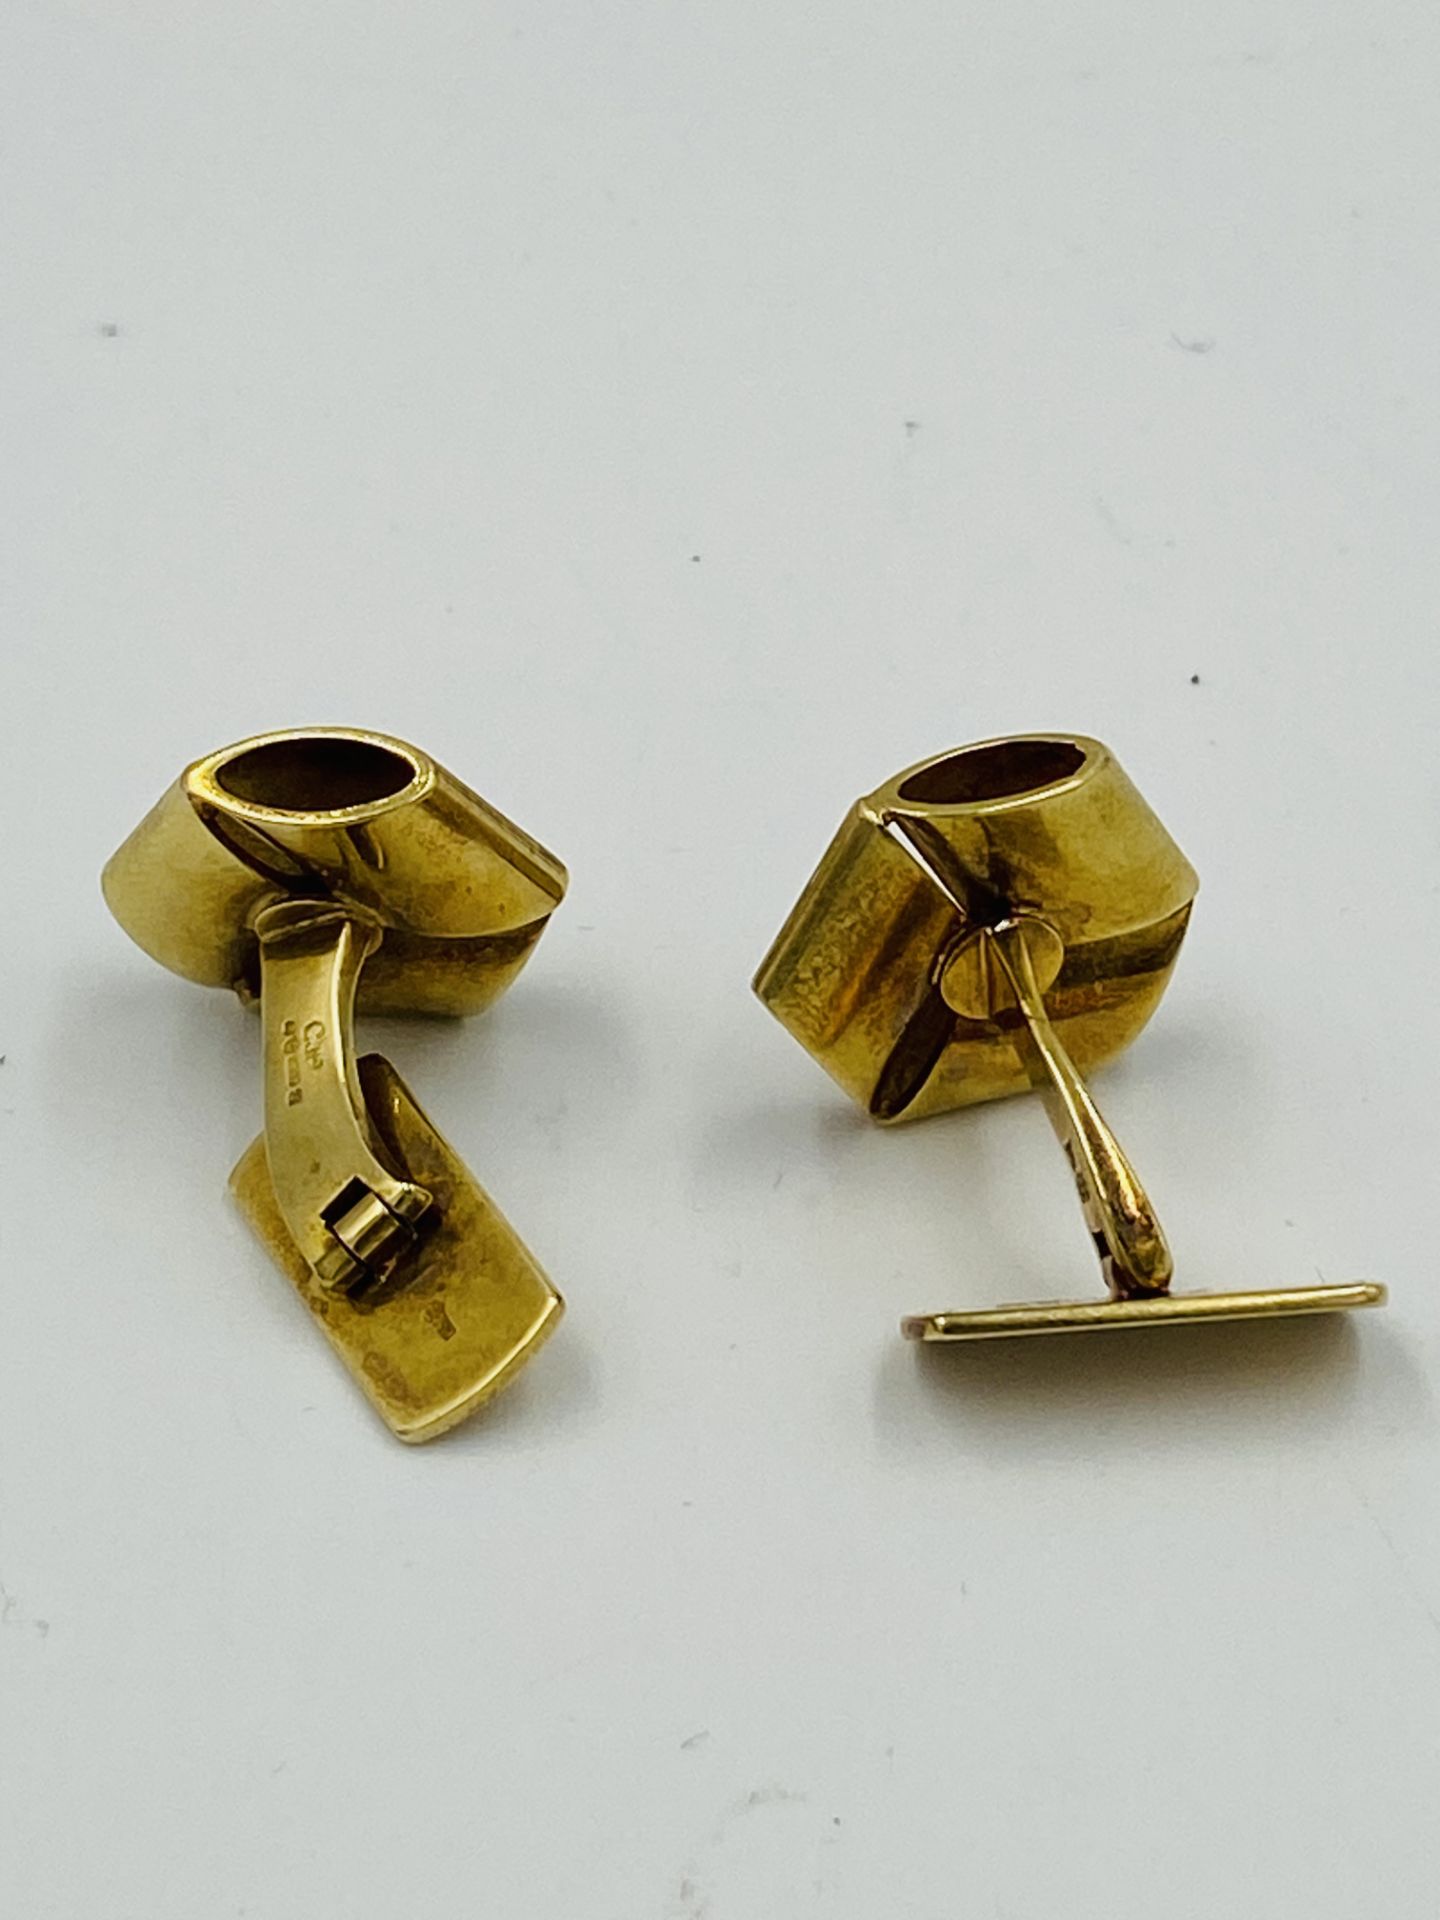 A pair of 14ct gold cufflinks - Image 3 of 4